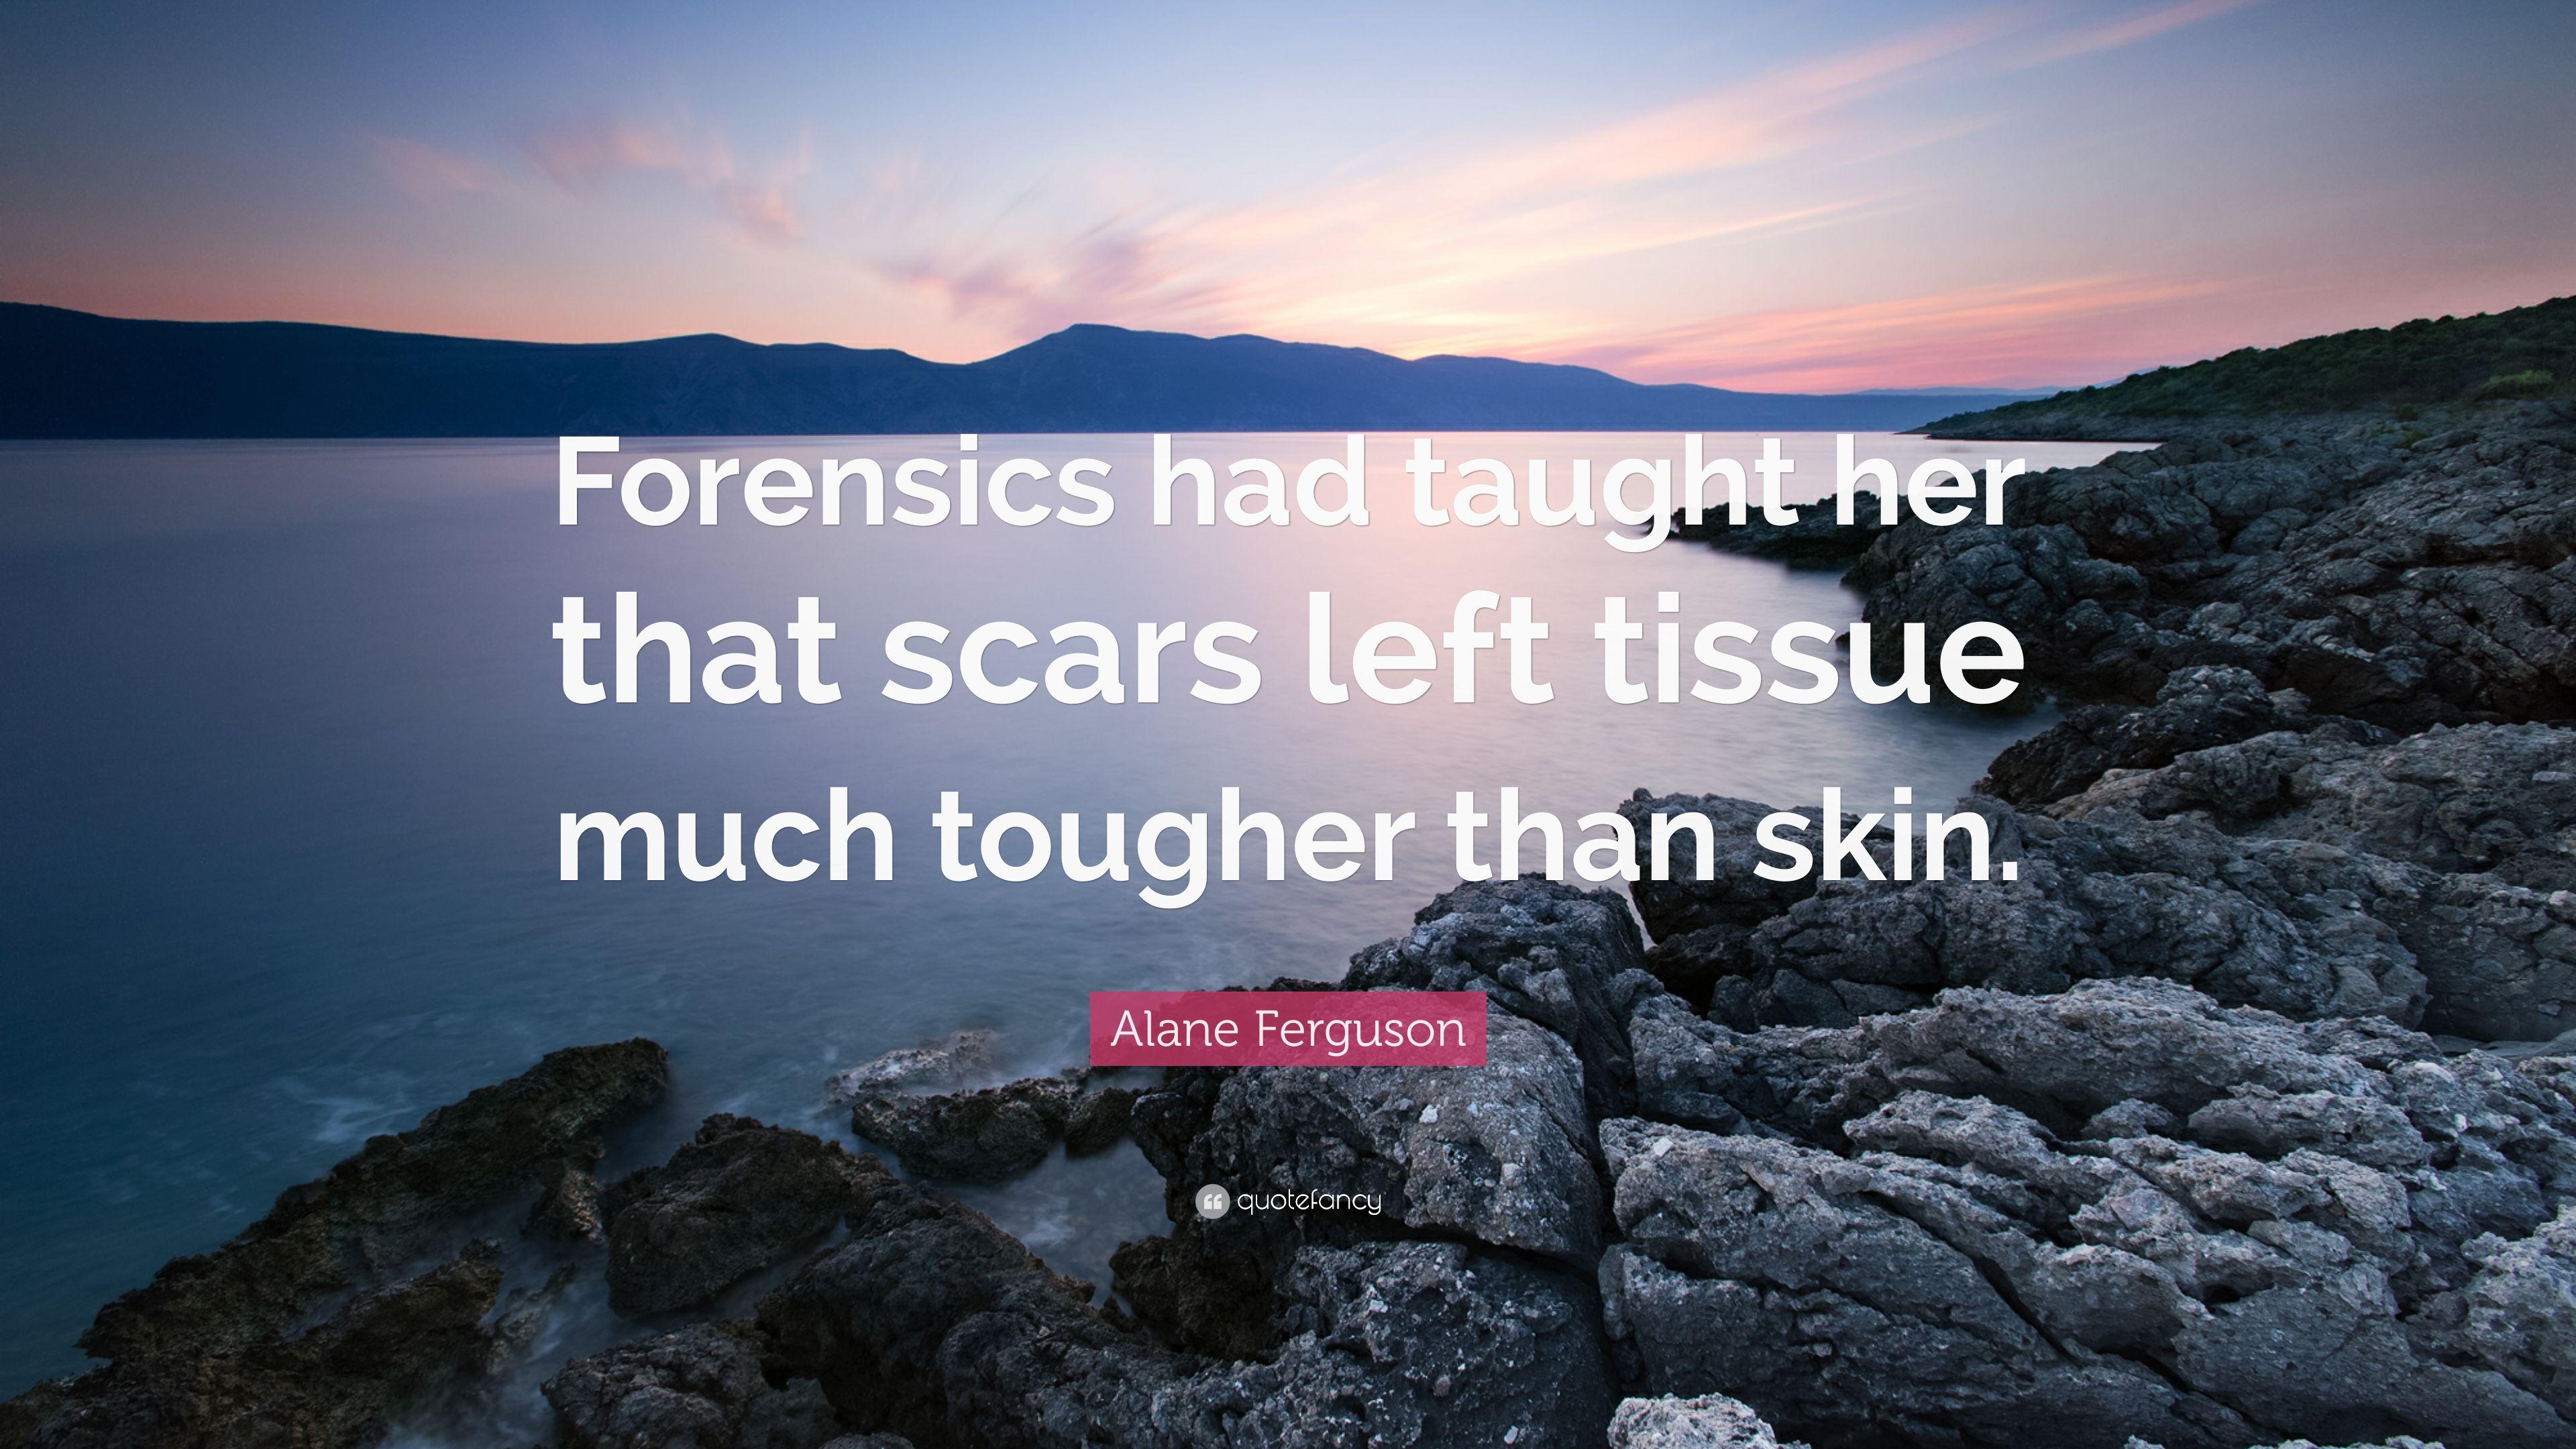 Alane Ferguson Quote: “Forensics had taught her that scars left